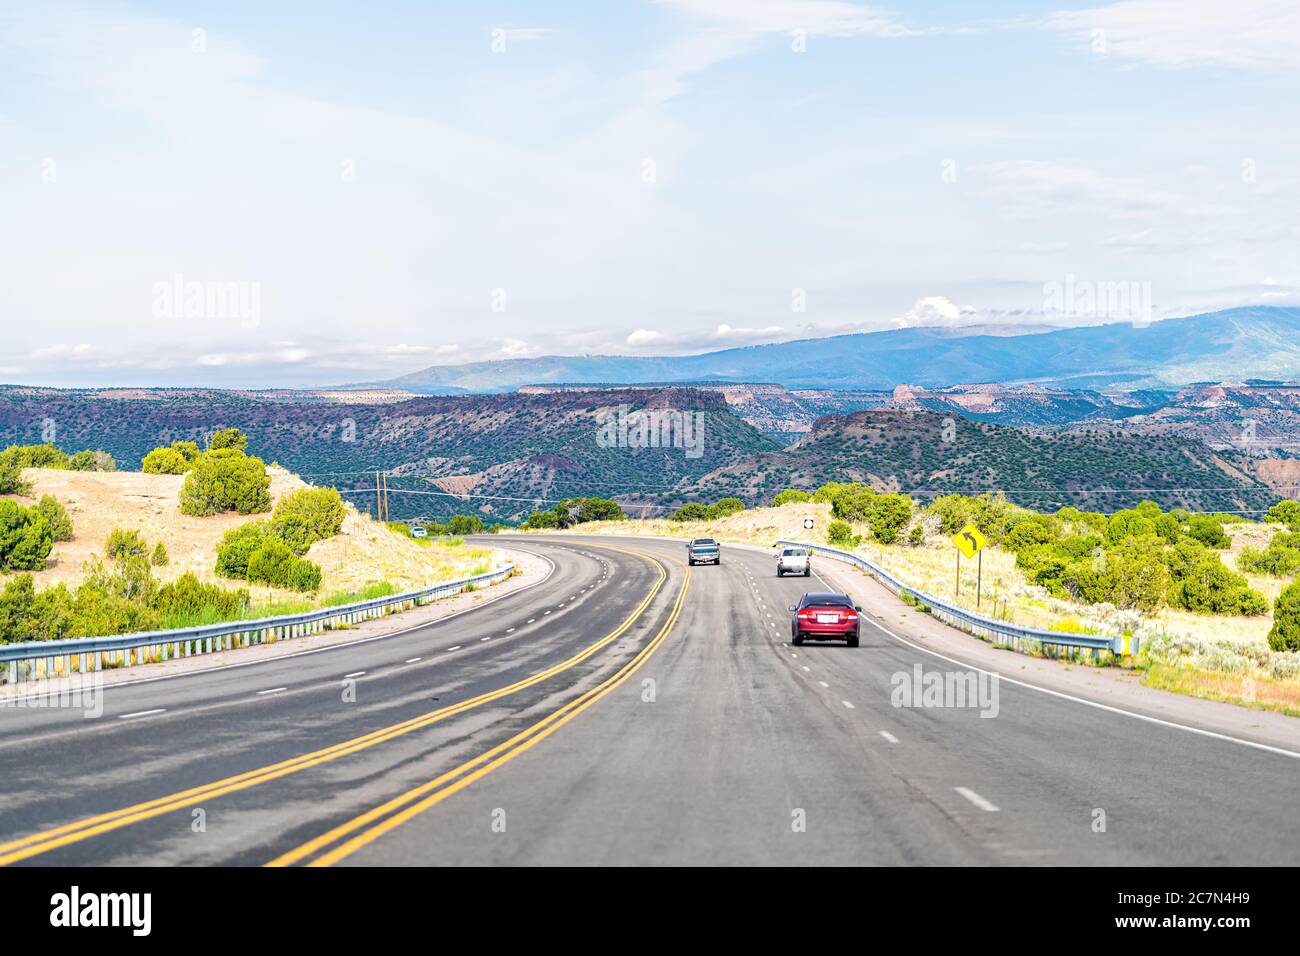 Santa Fe county, New Mexico desert with cars on road highway to Los Alamos driving on street 502 west Stock Photo